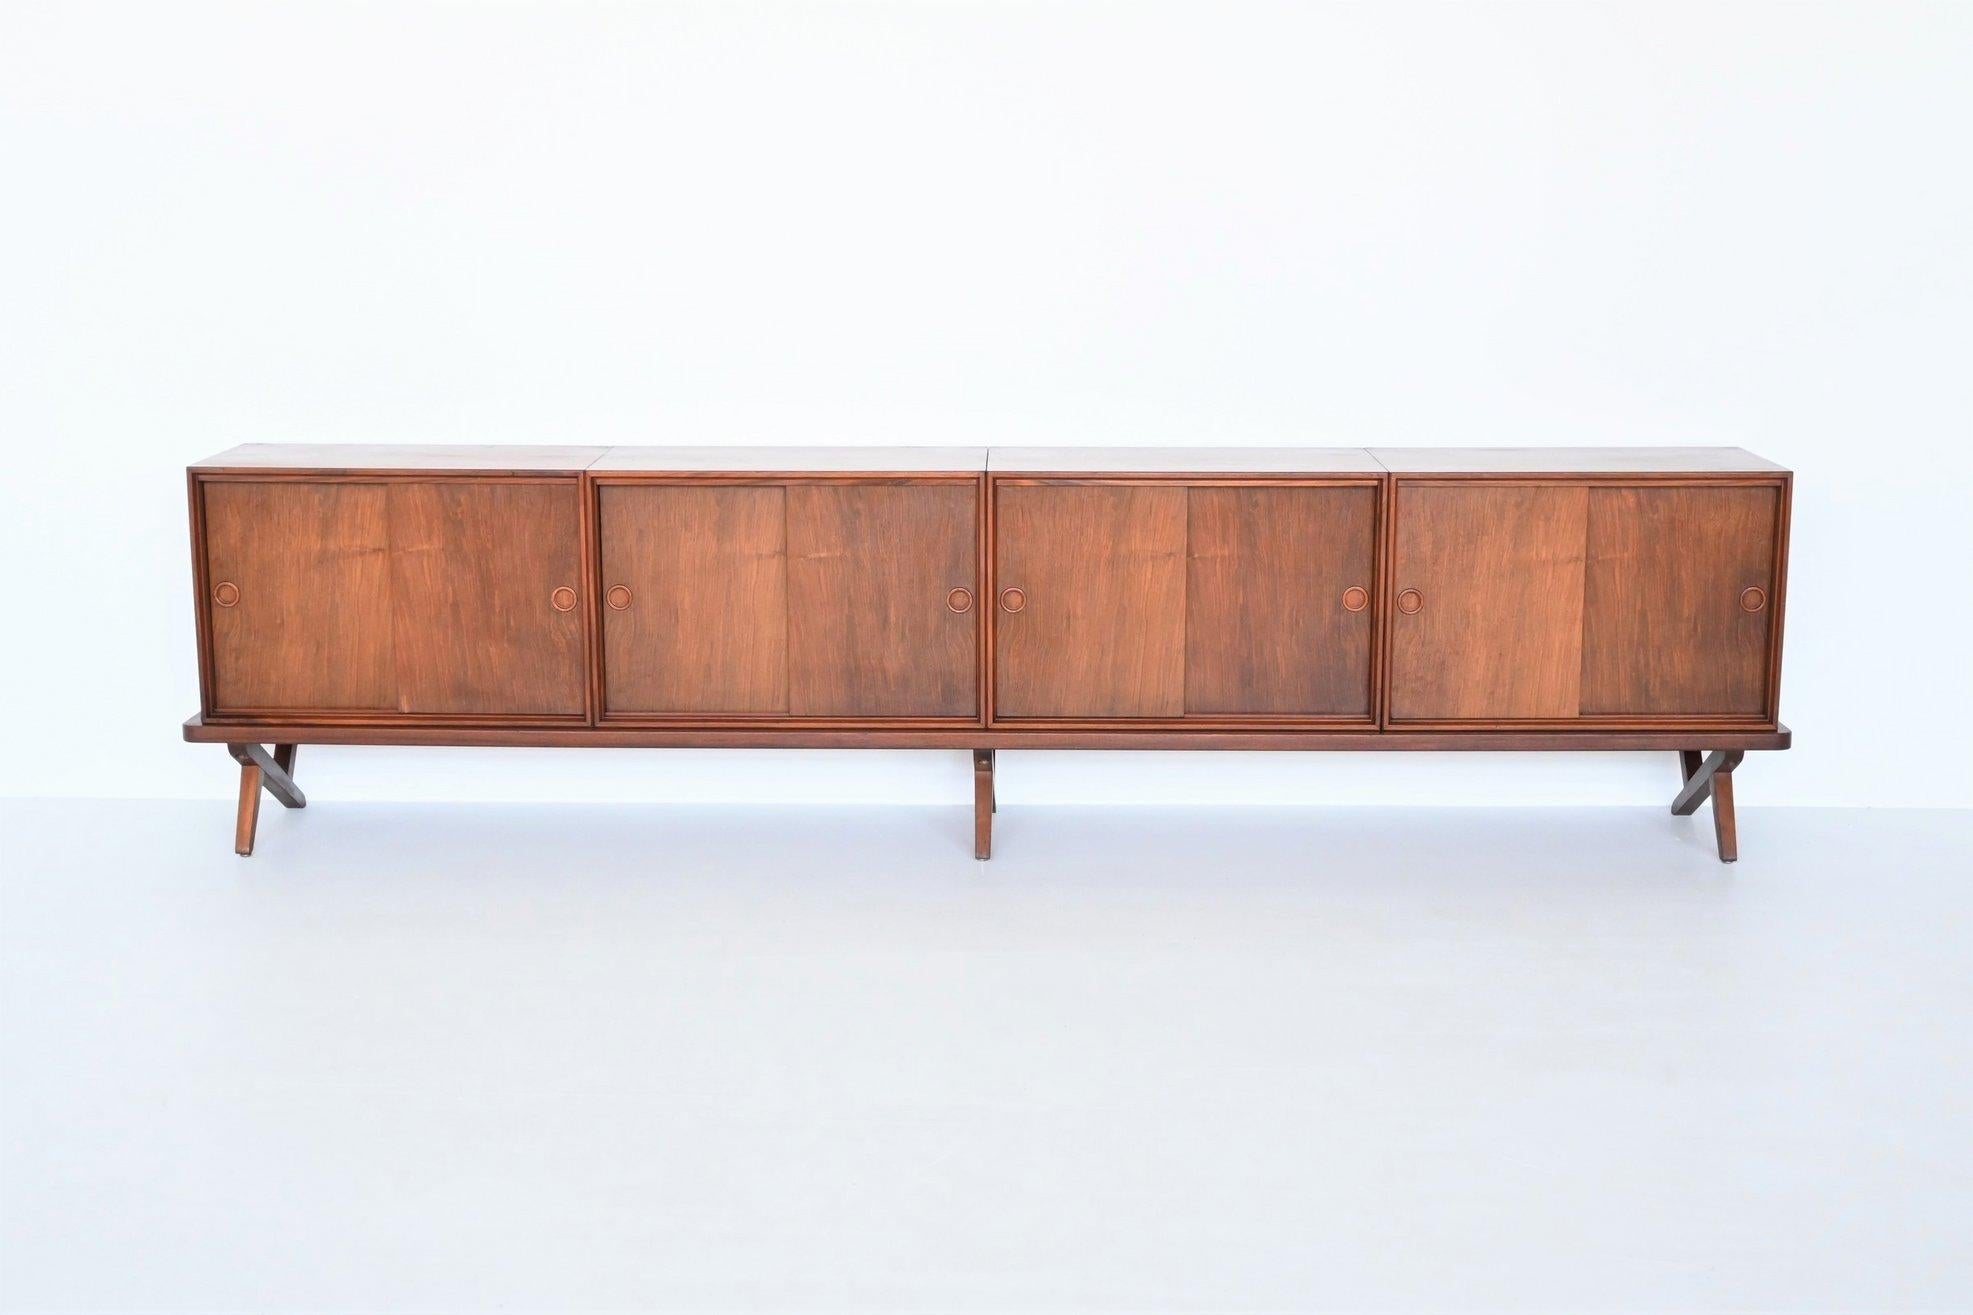 Beautiful shaped long sideboard designed by Rudolf Bernd Glatzel and manufactured by Fristho Franeker, The Netherlands 1955. This unique sideboard has four compartments, all with two sliding doors and a shelve each. This was designed as a modular